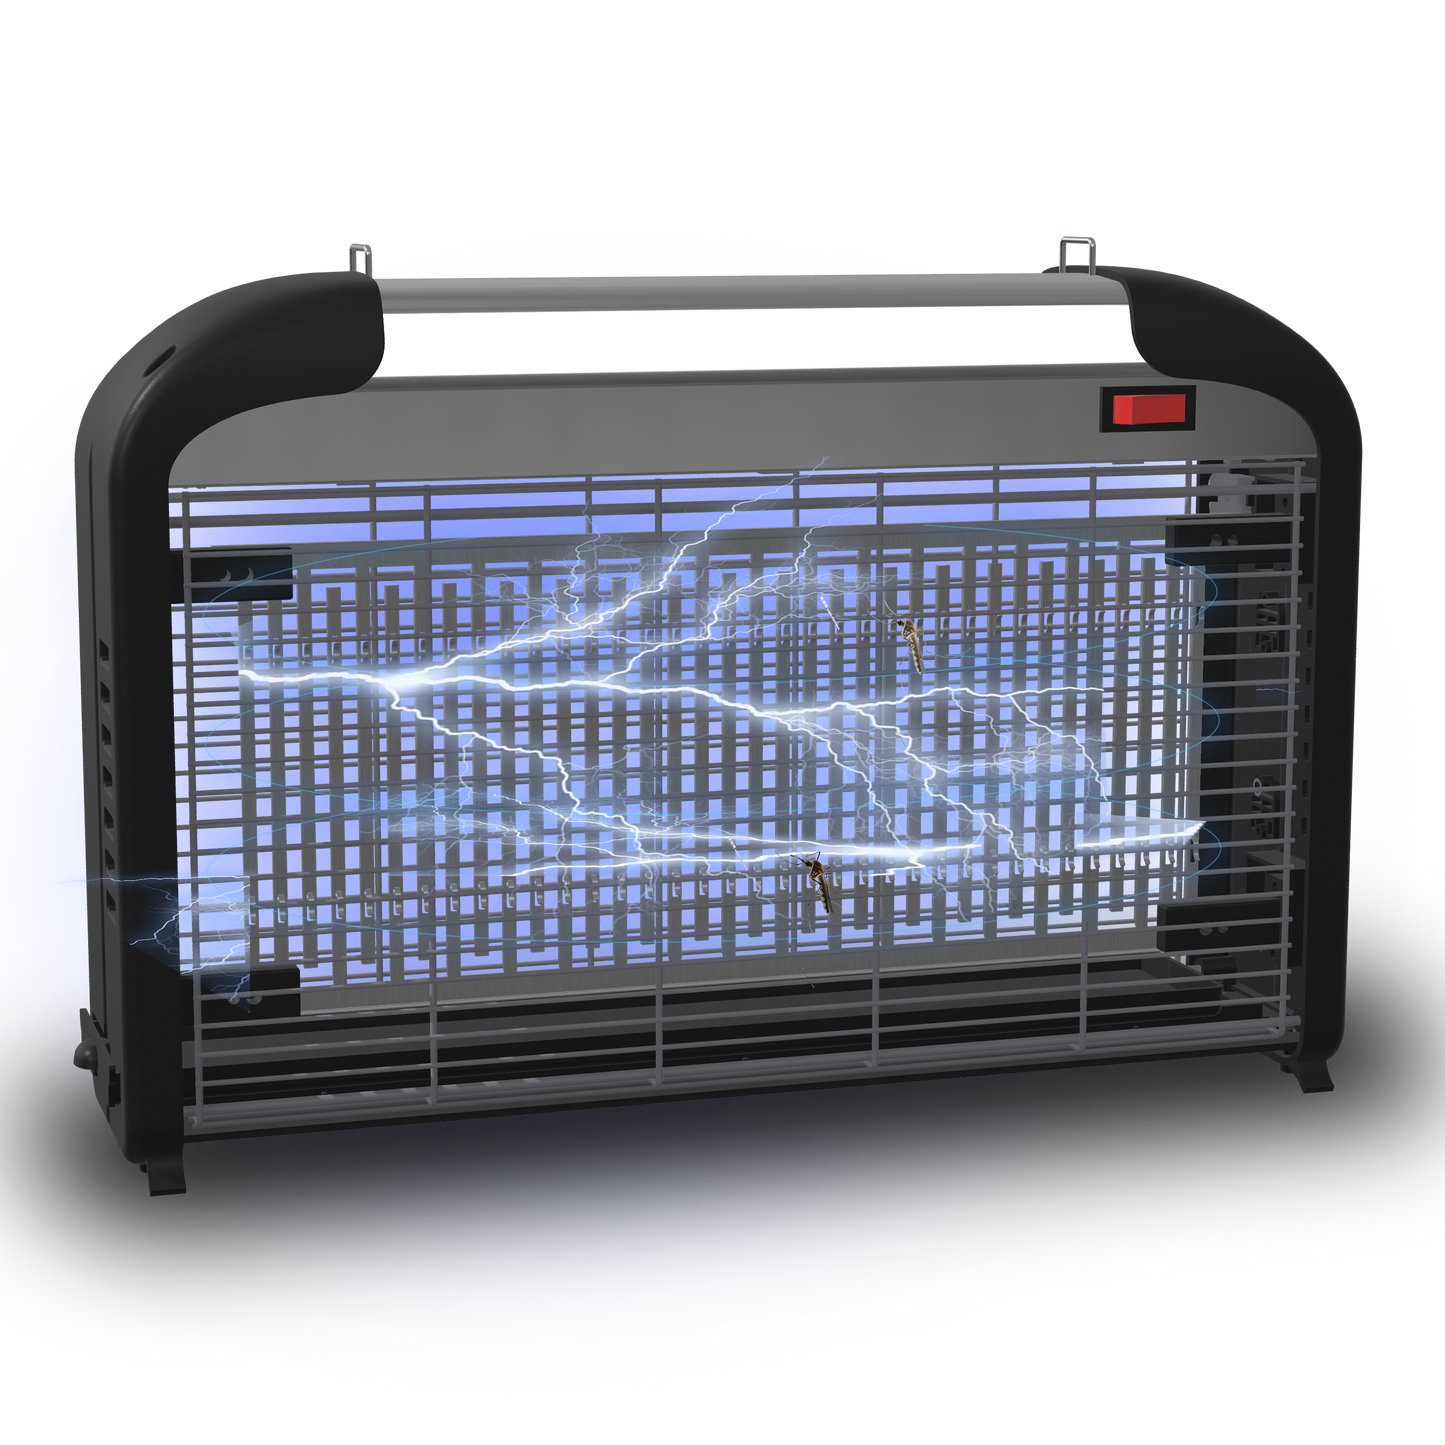 "Inconspicuous but Powerfu" MK-077 Series Bug Zapper with 28 PCS UV Light Strip